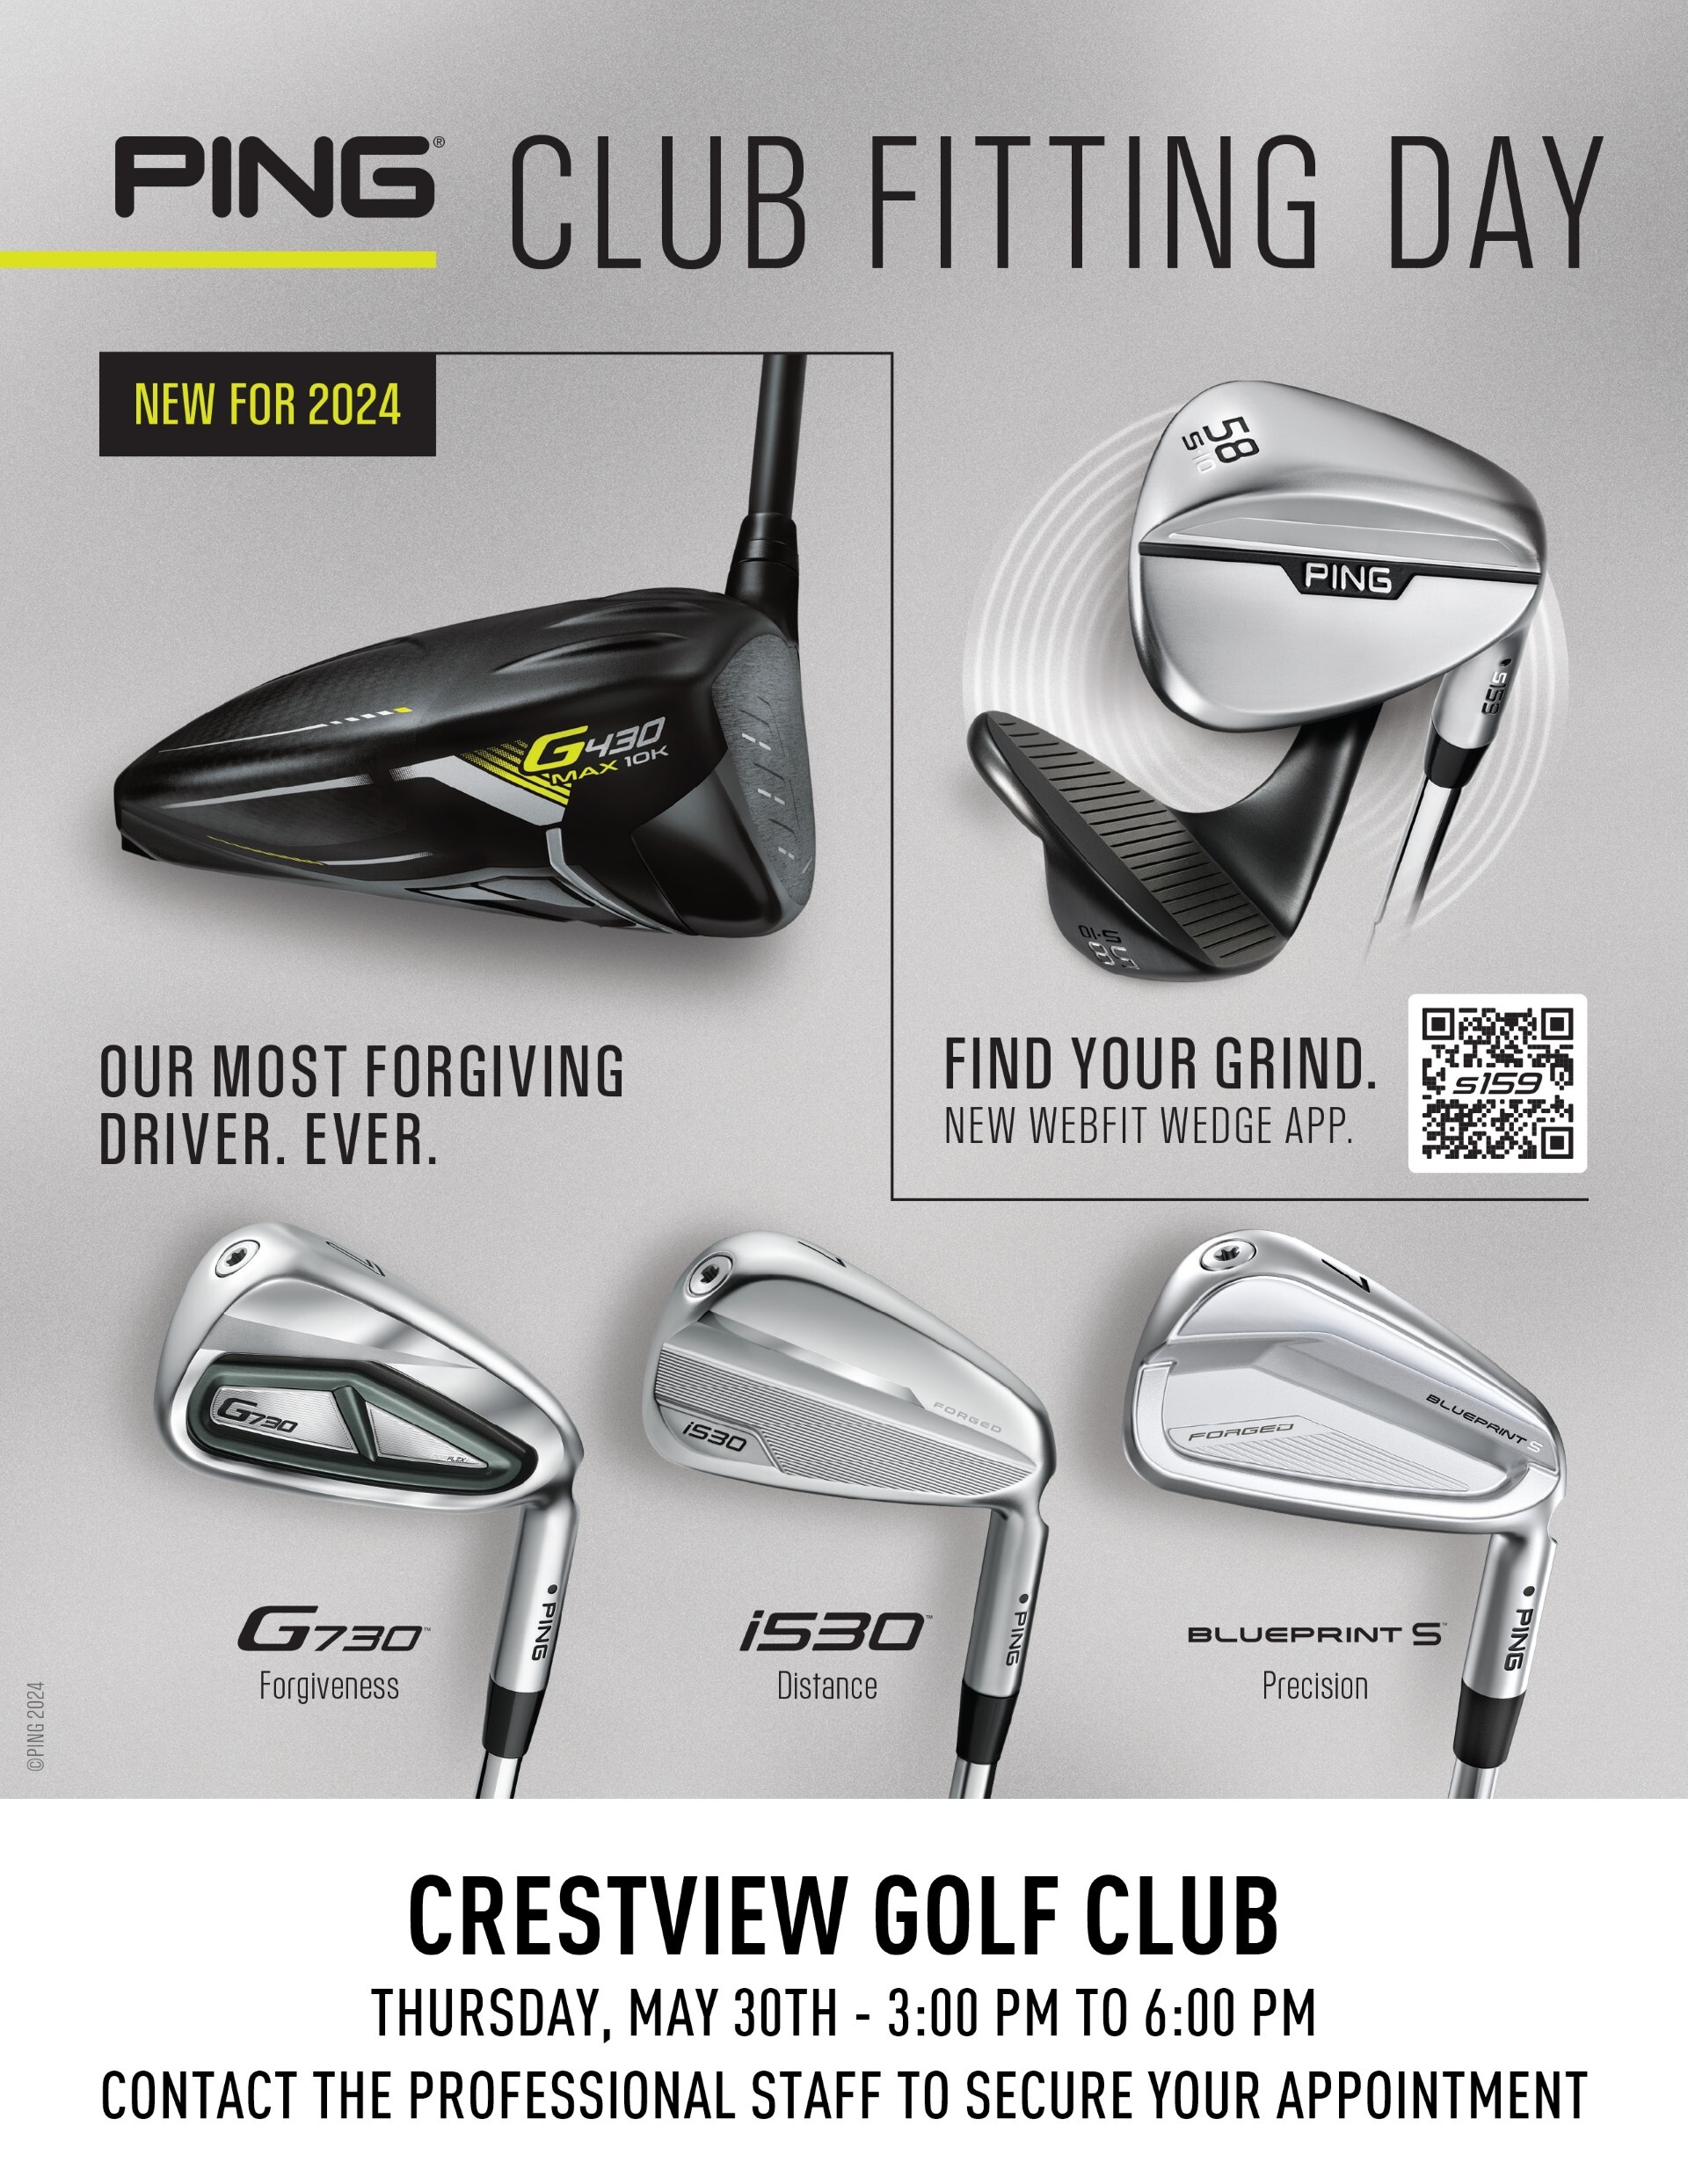 Crestview's Ping Club Fitting Day